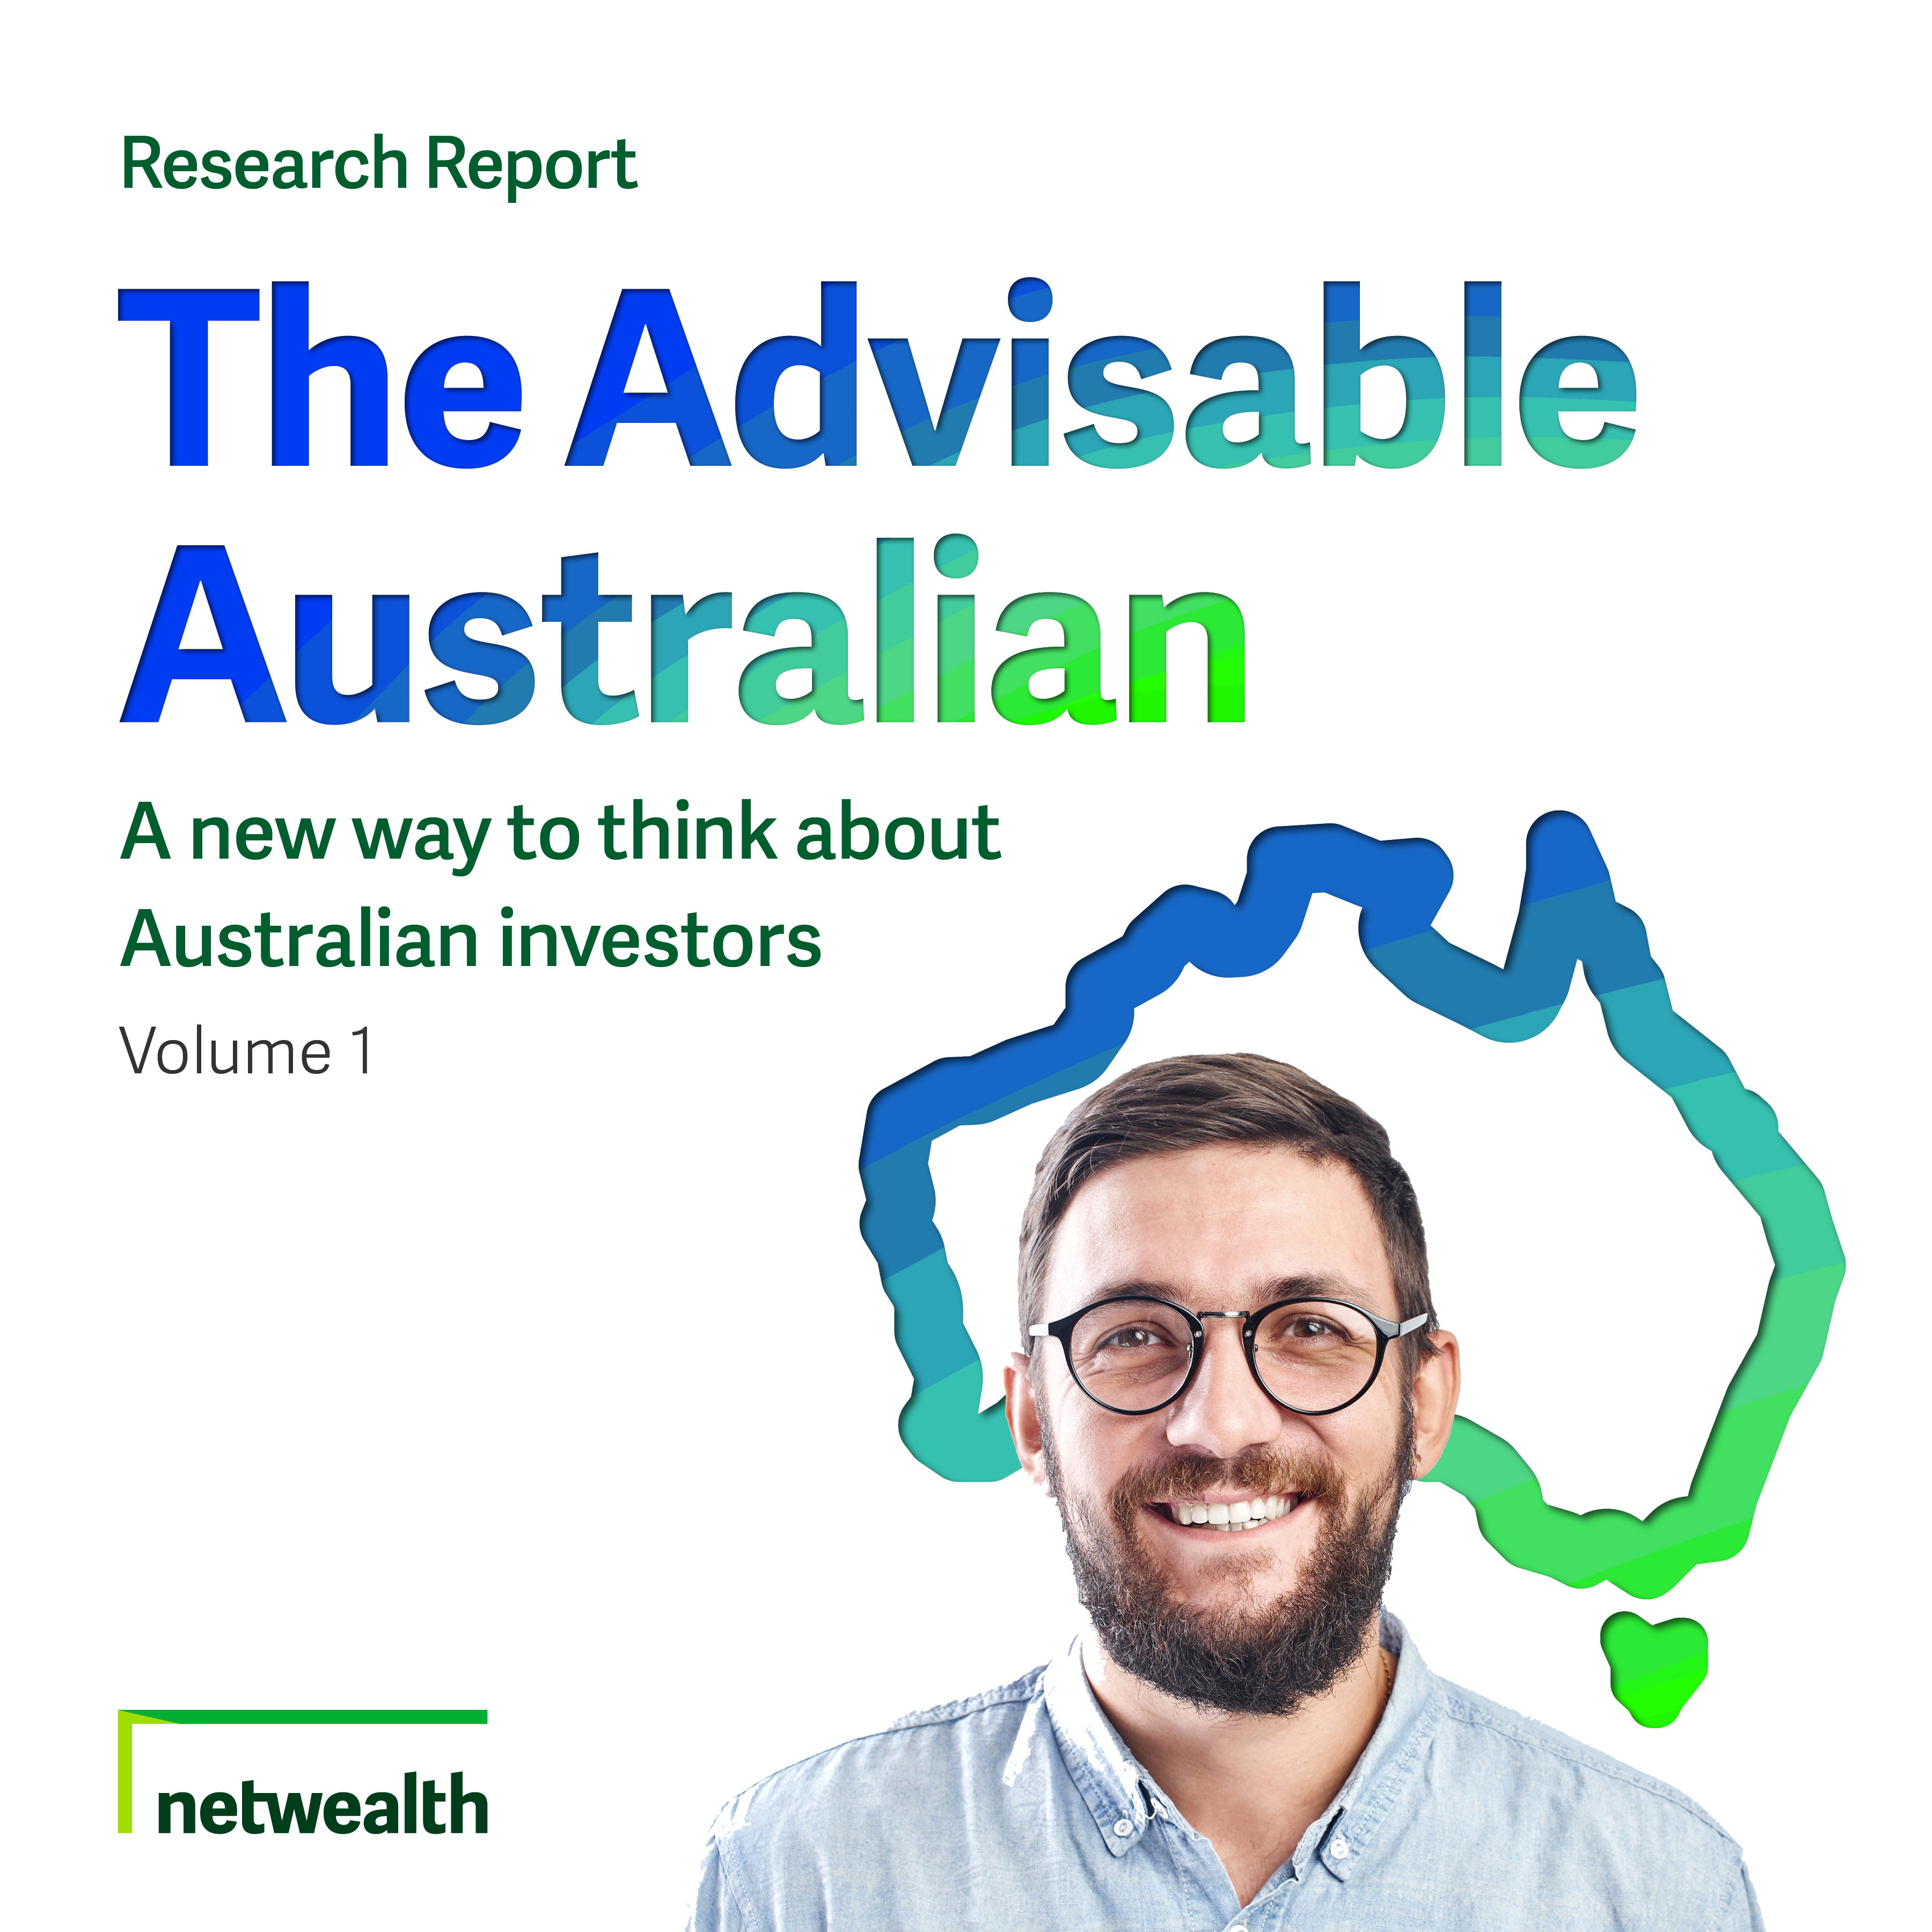 The Advisable Australian - A new way to think about investors